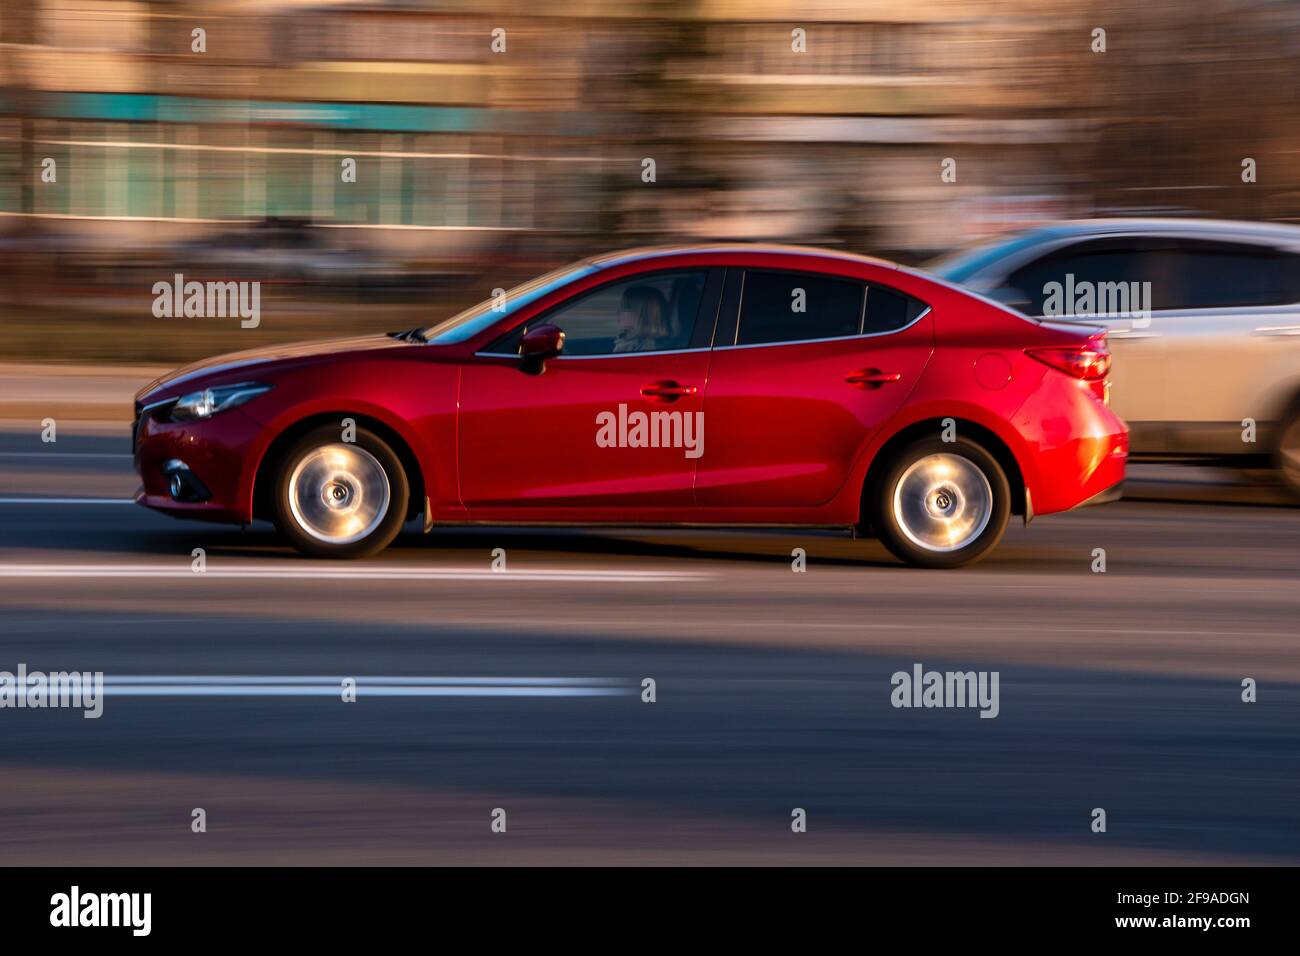 Ukraine, Kyiv - 11 March 2021: Red Mazda 3 car moving on the street; Stock Photo